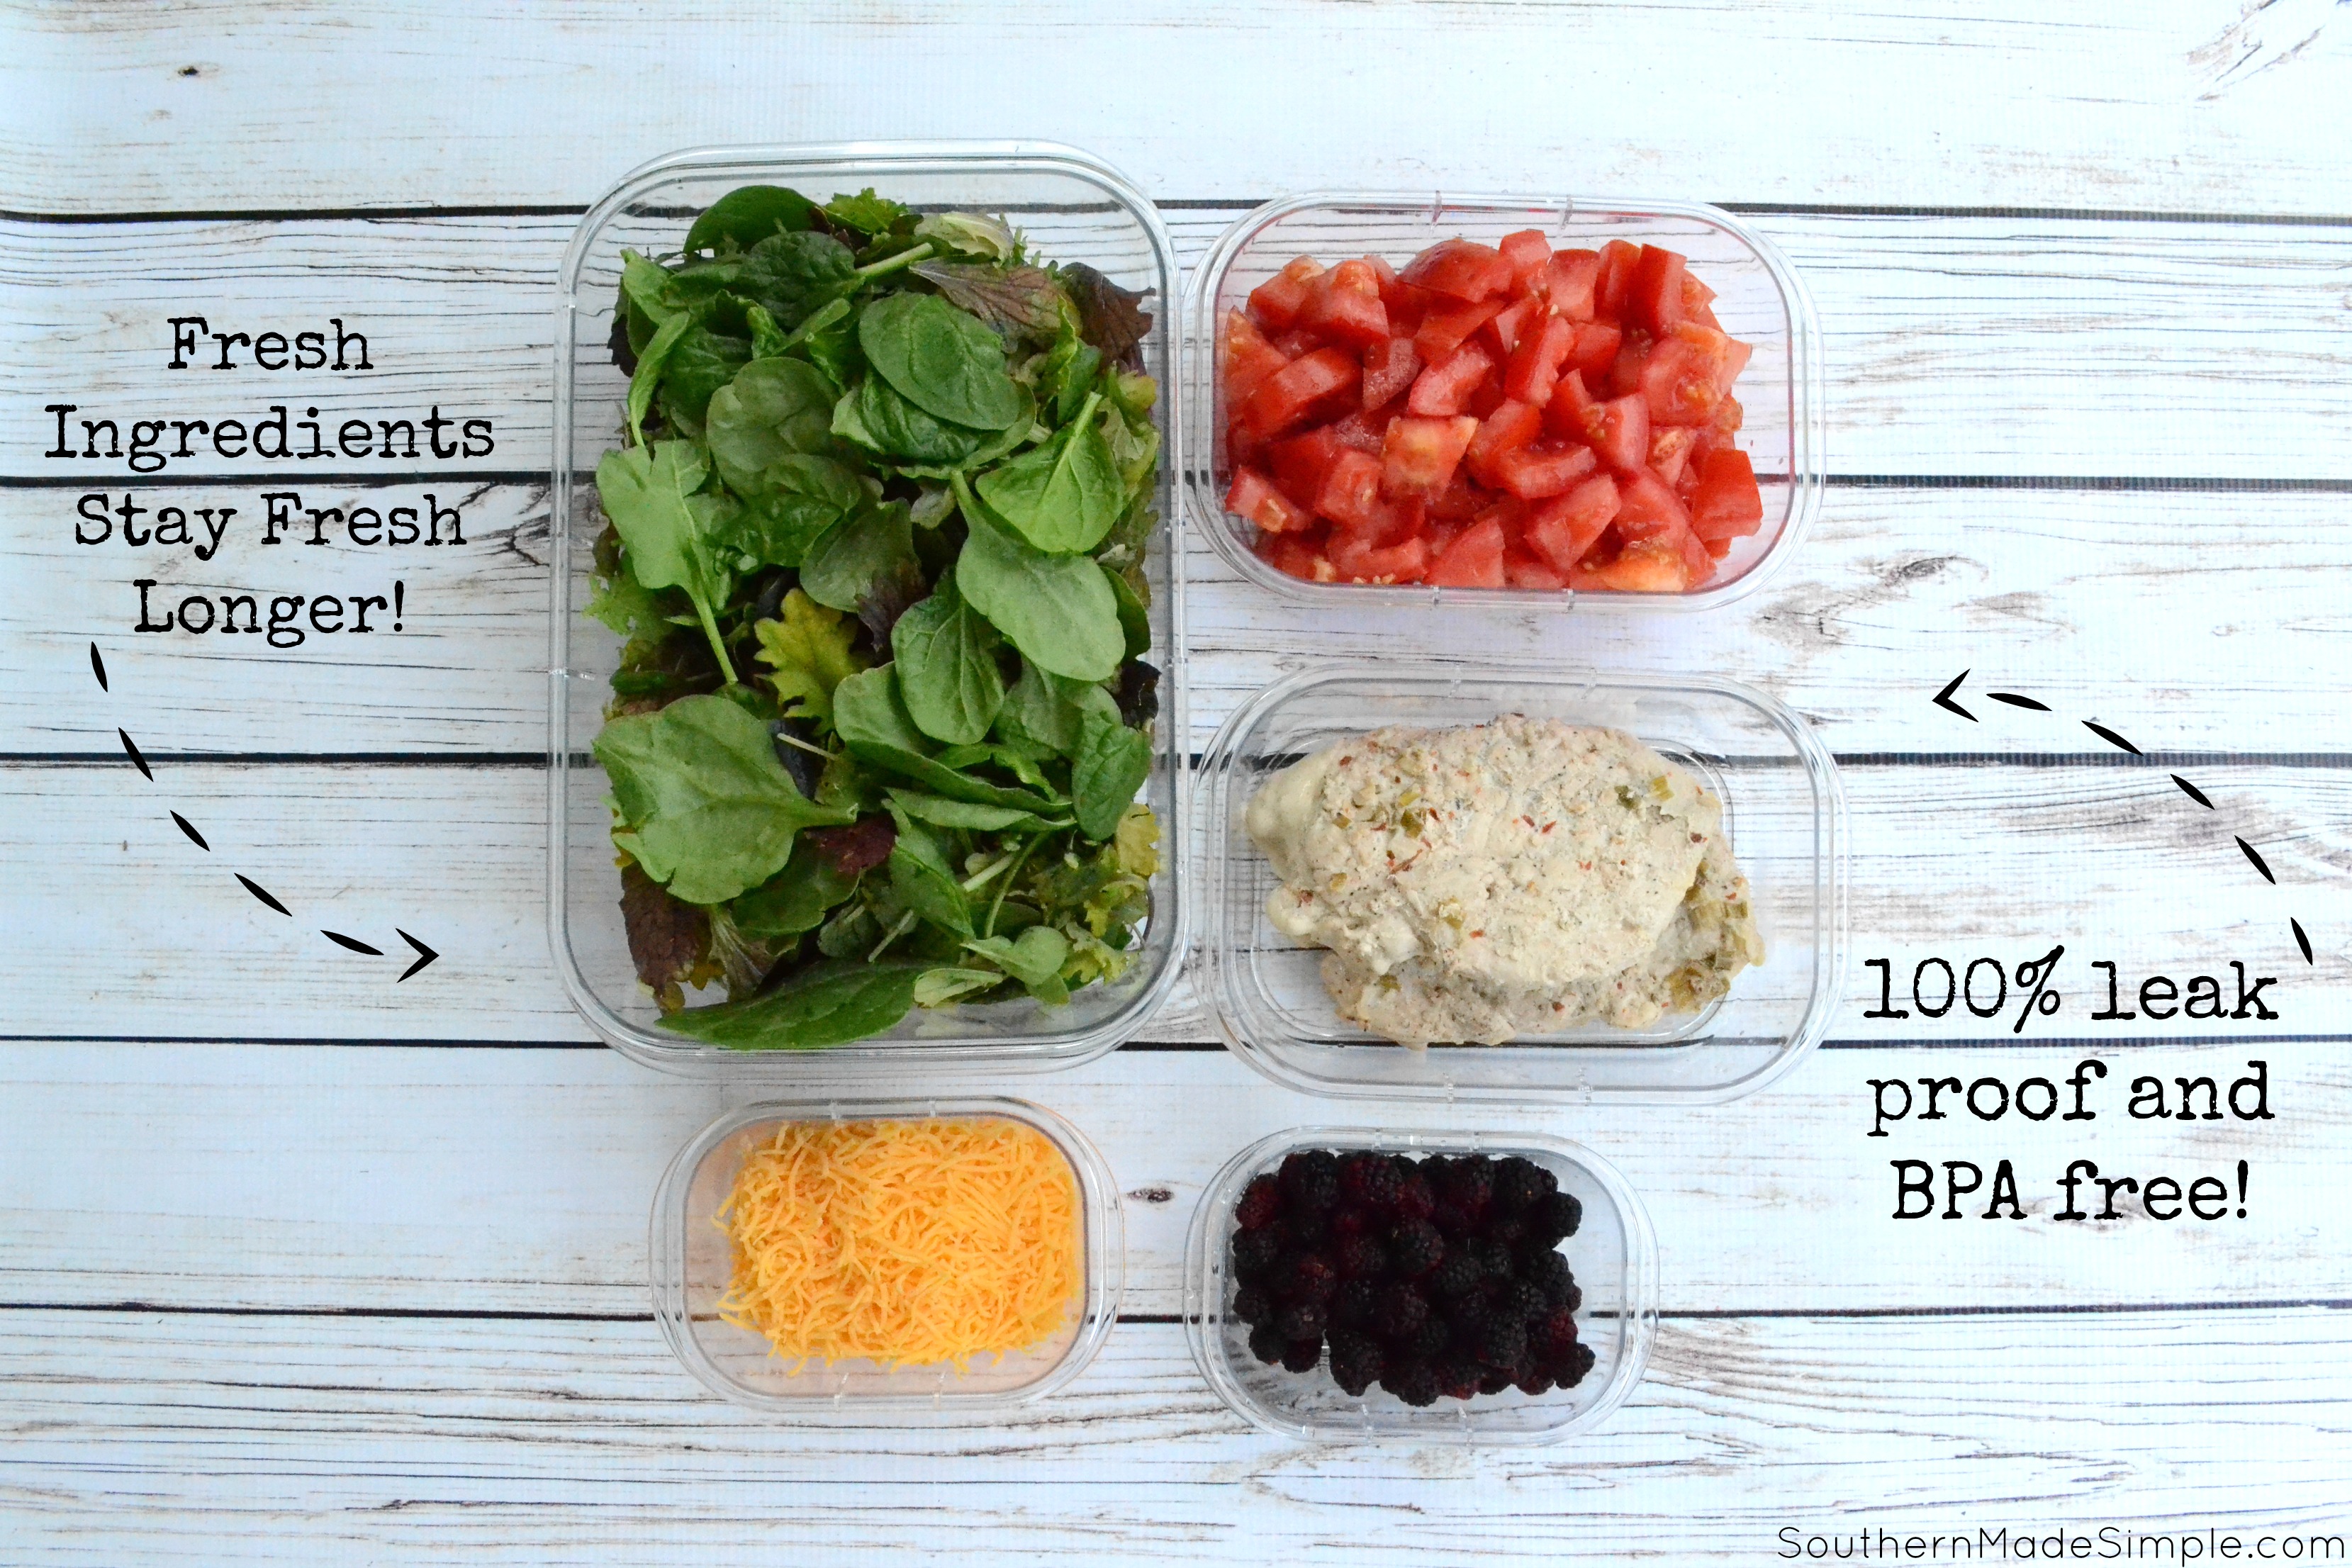 Meal Prep Made Easy with Rubbermaid Brilliance Review #StoredBrilliantly #ad 